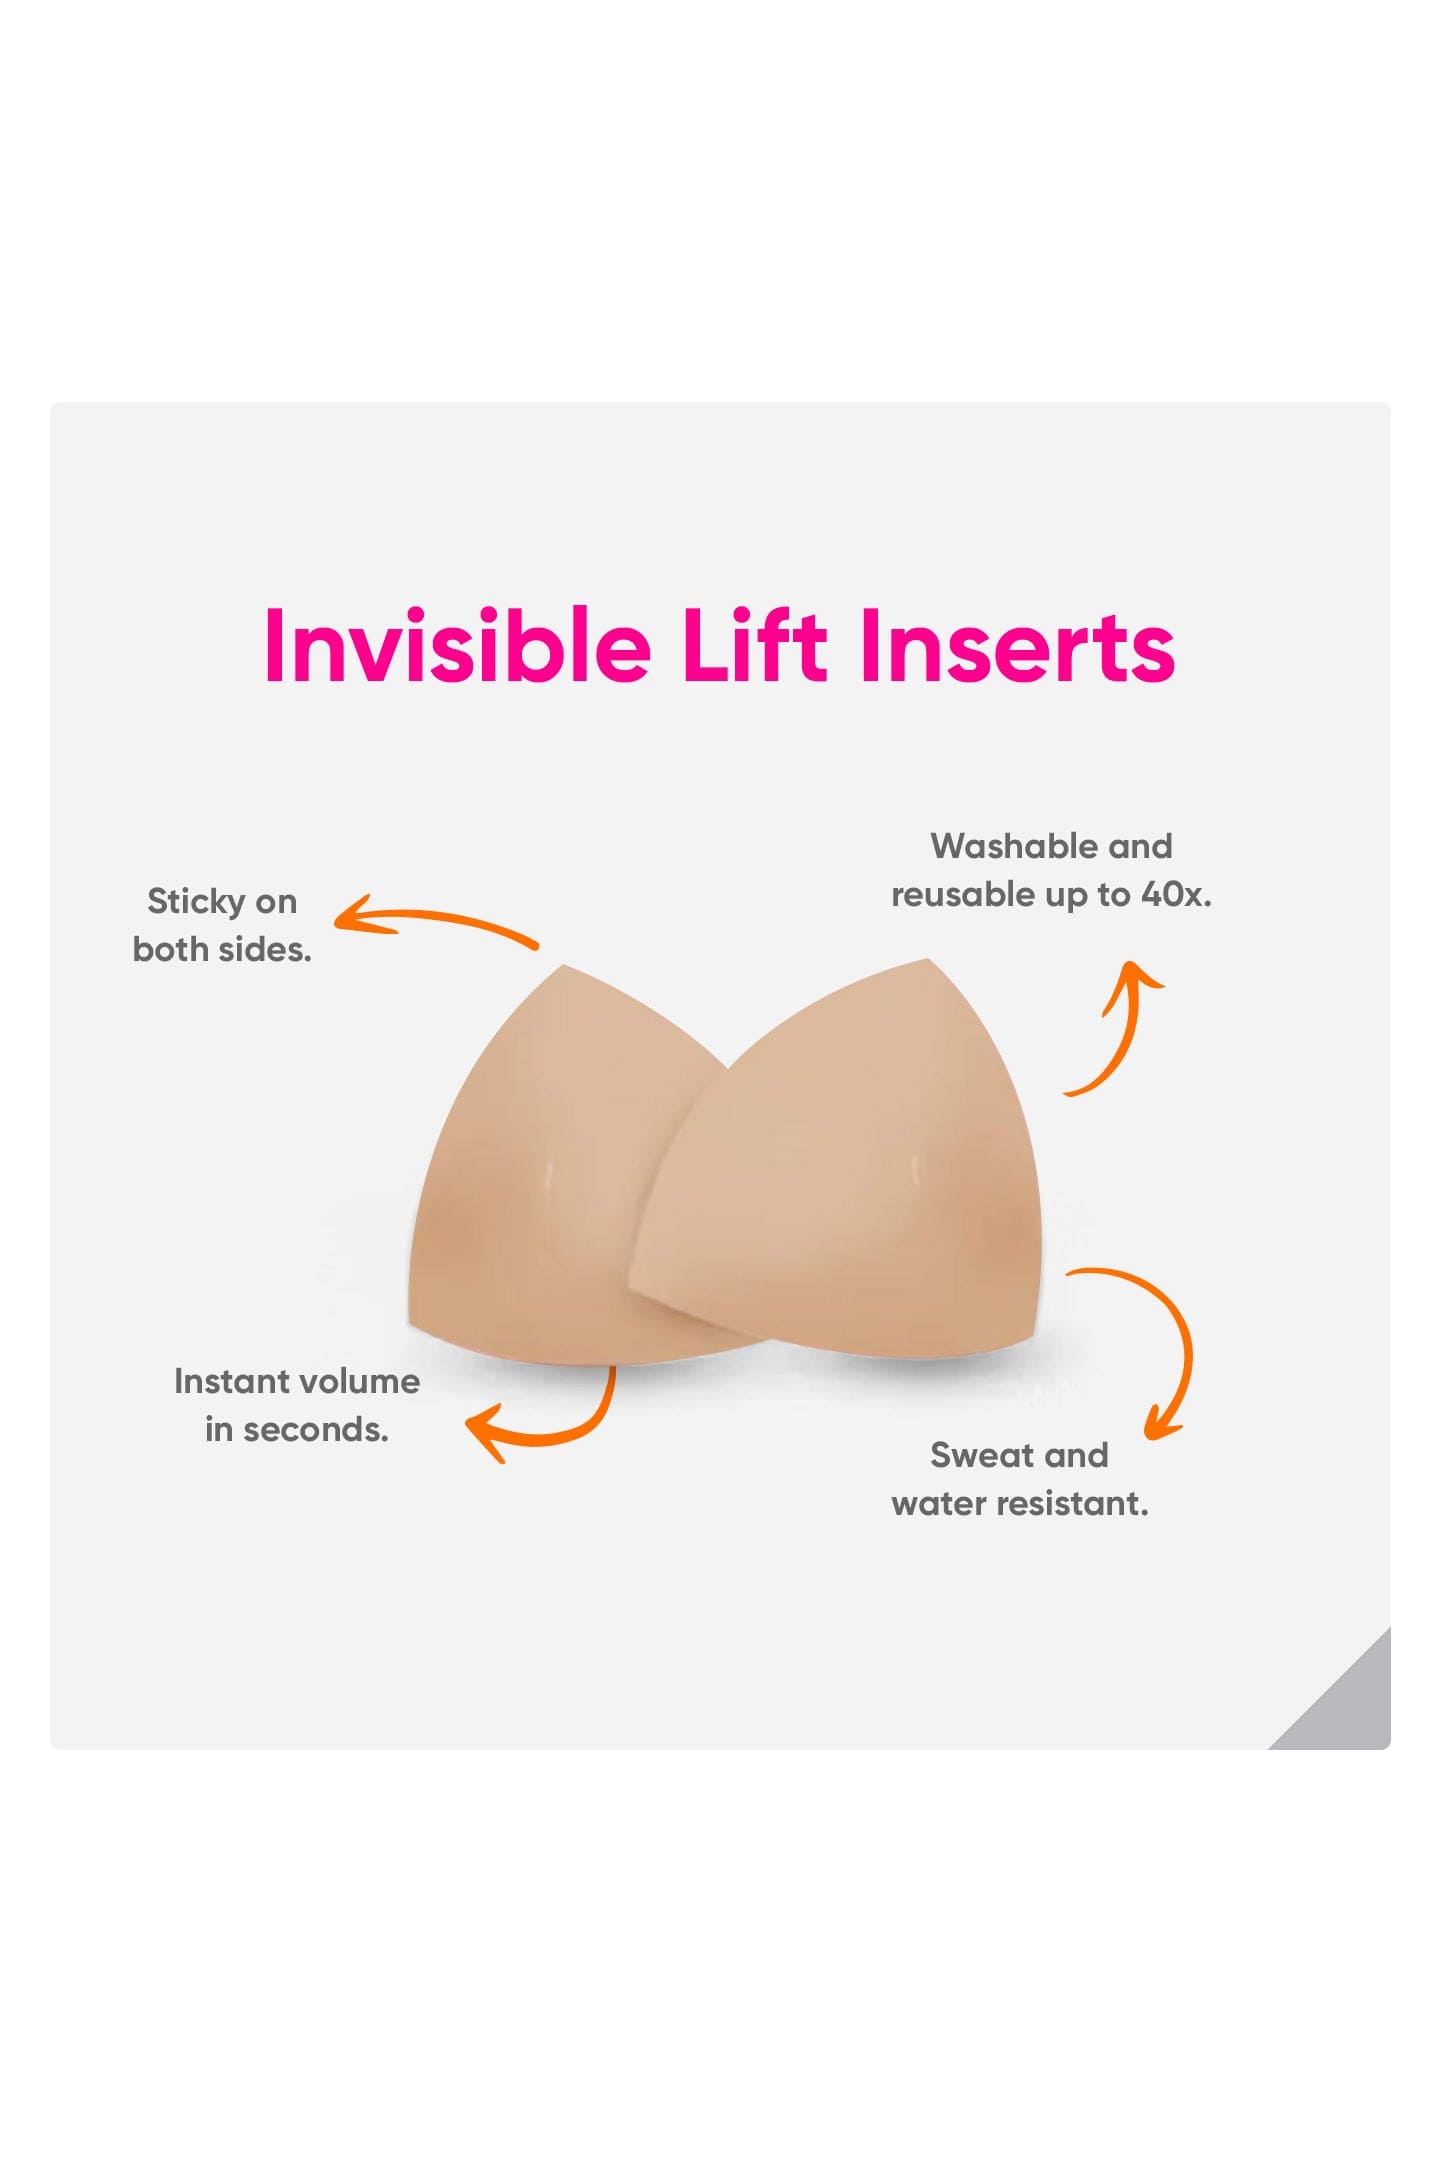 Boomba Invisible Lift Inserts – Fitness Hub Shop